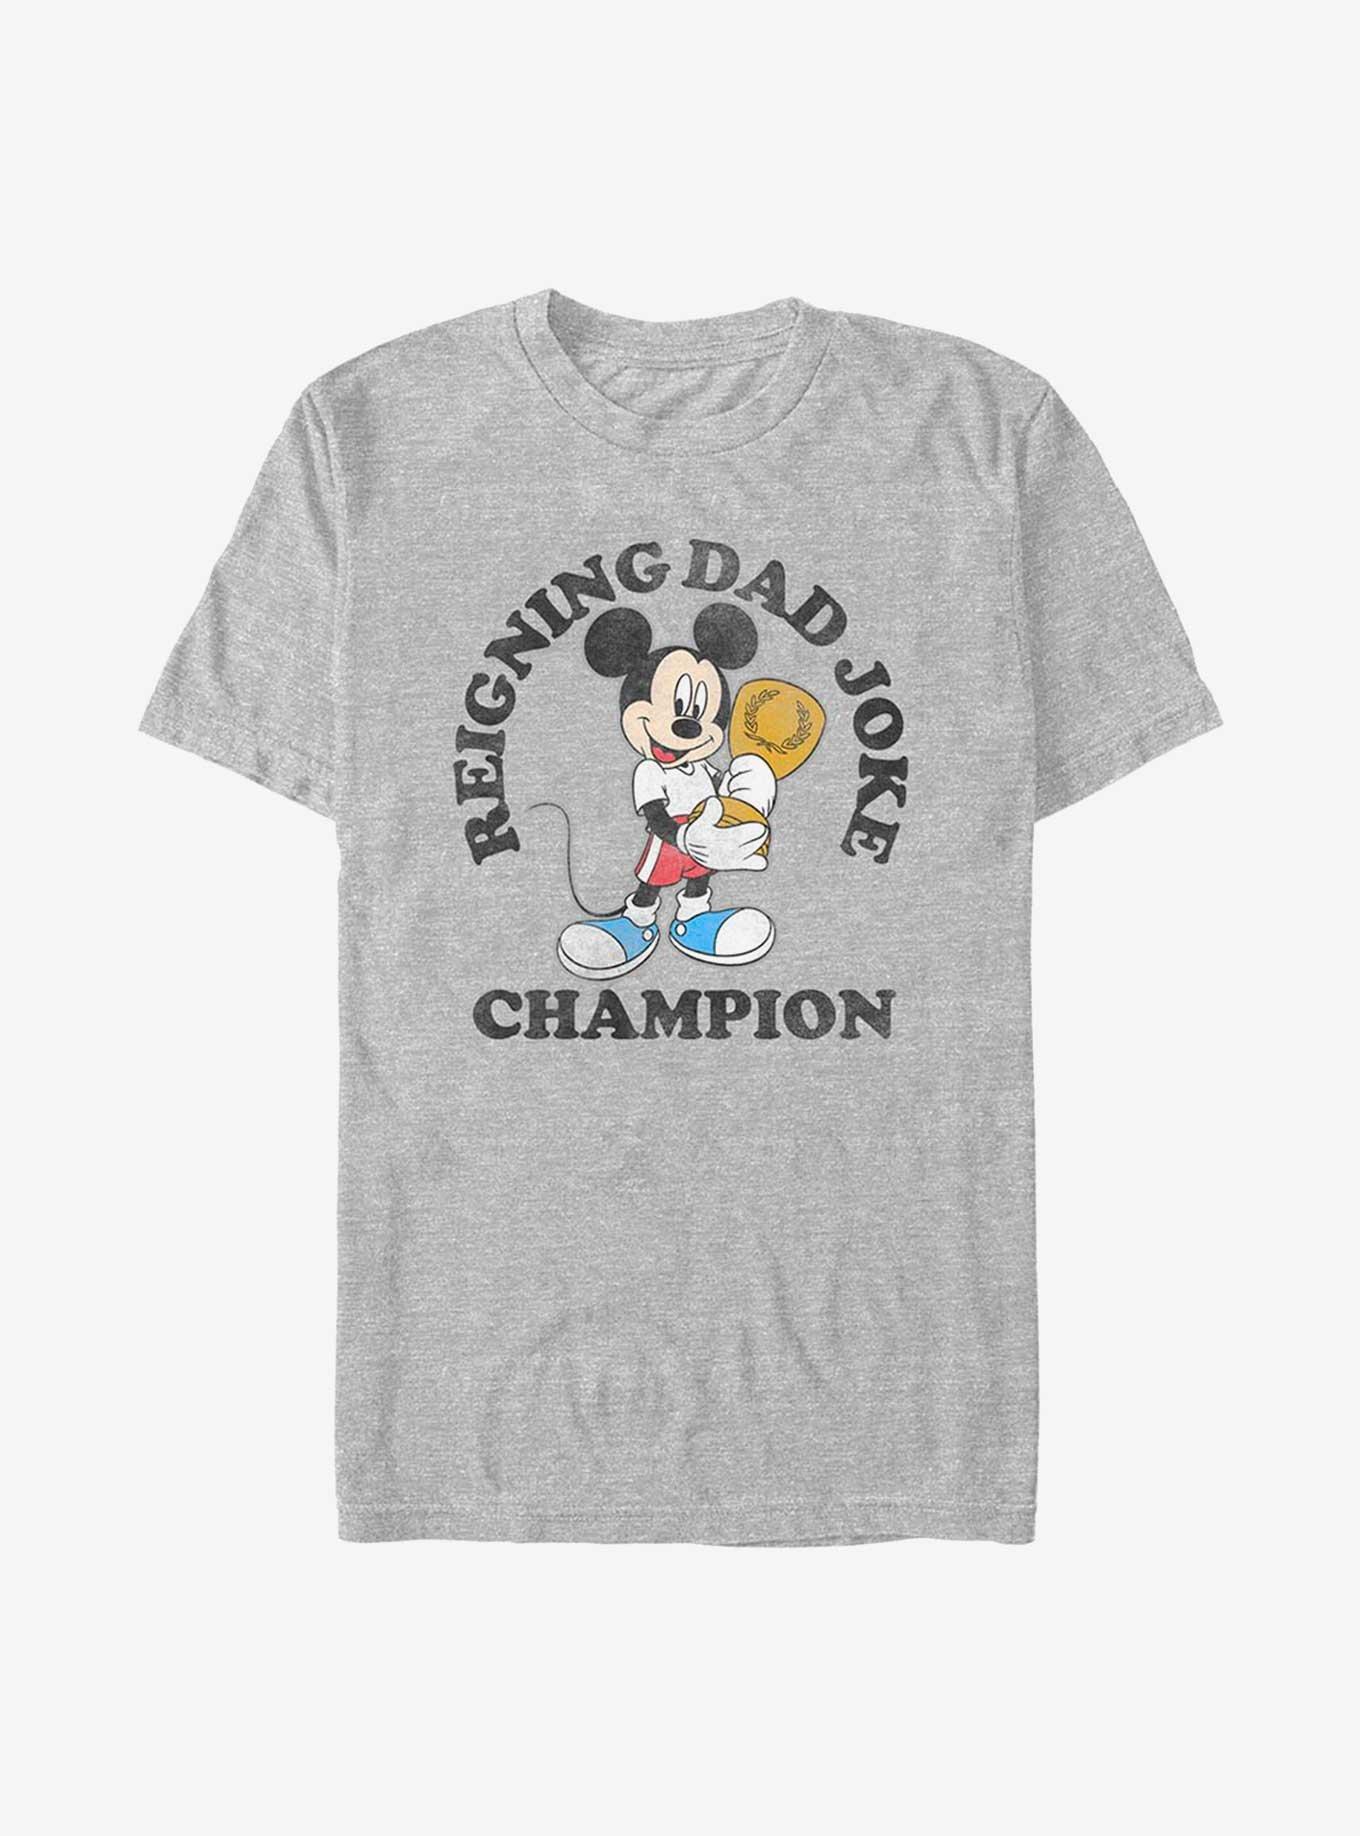 Get Buy Mickey Mouse X Champion Unisex Sweatshirt For Style Your Life